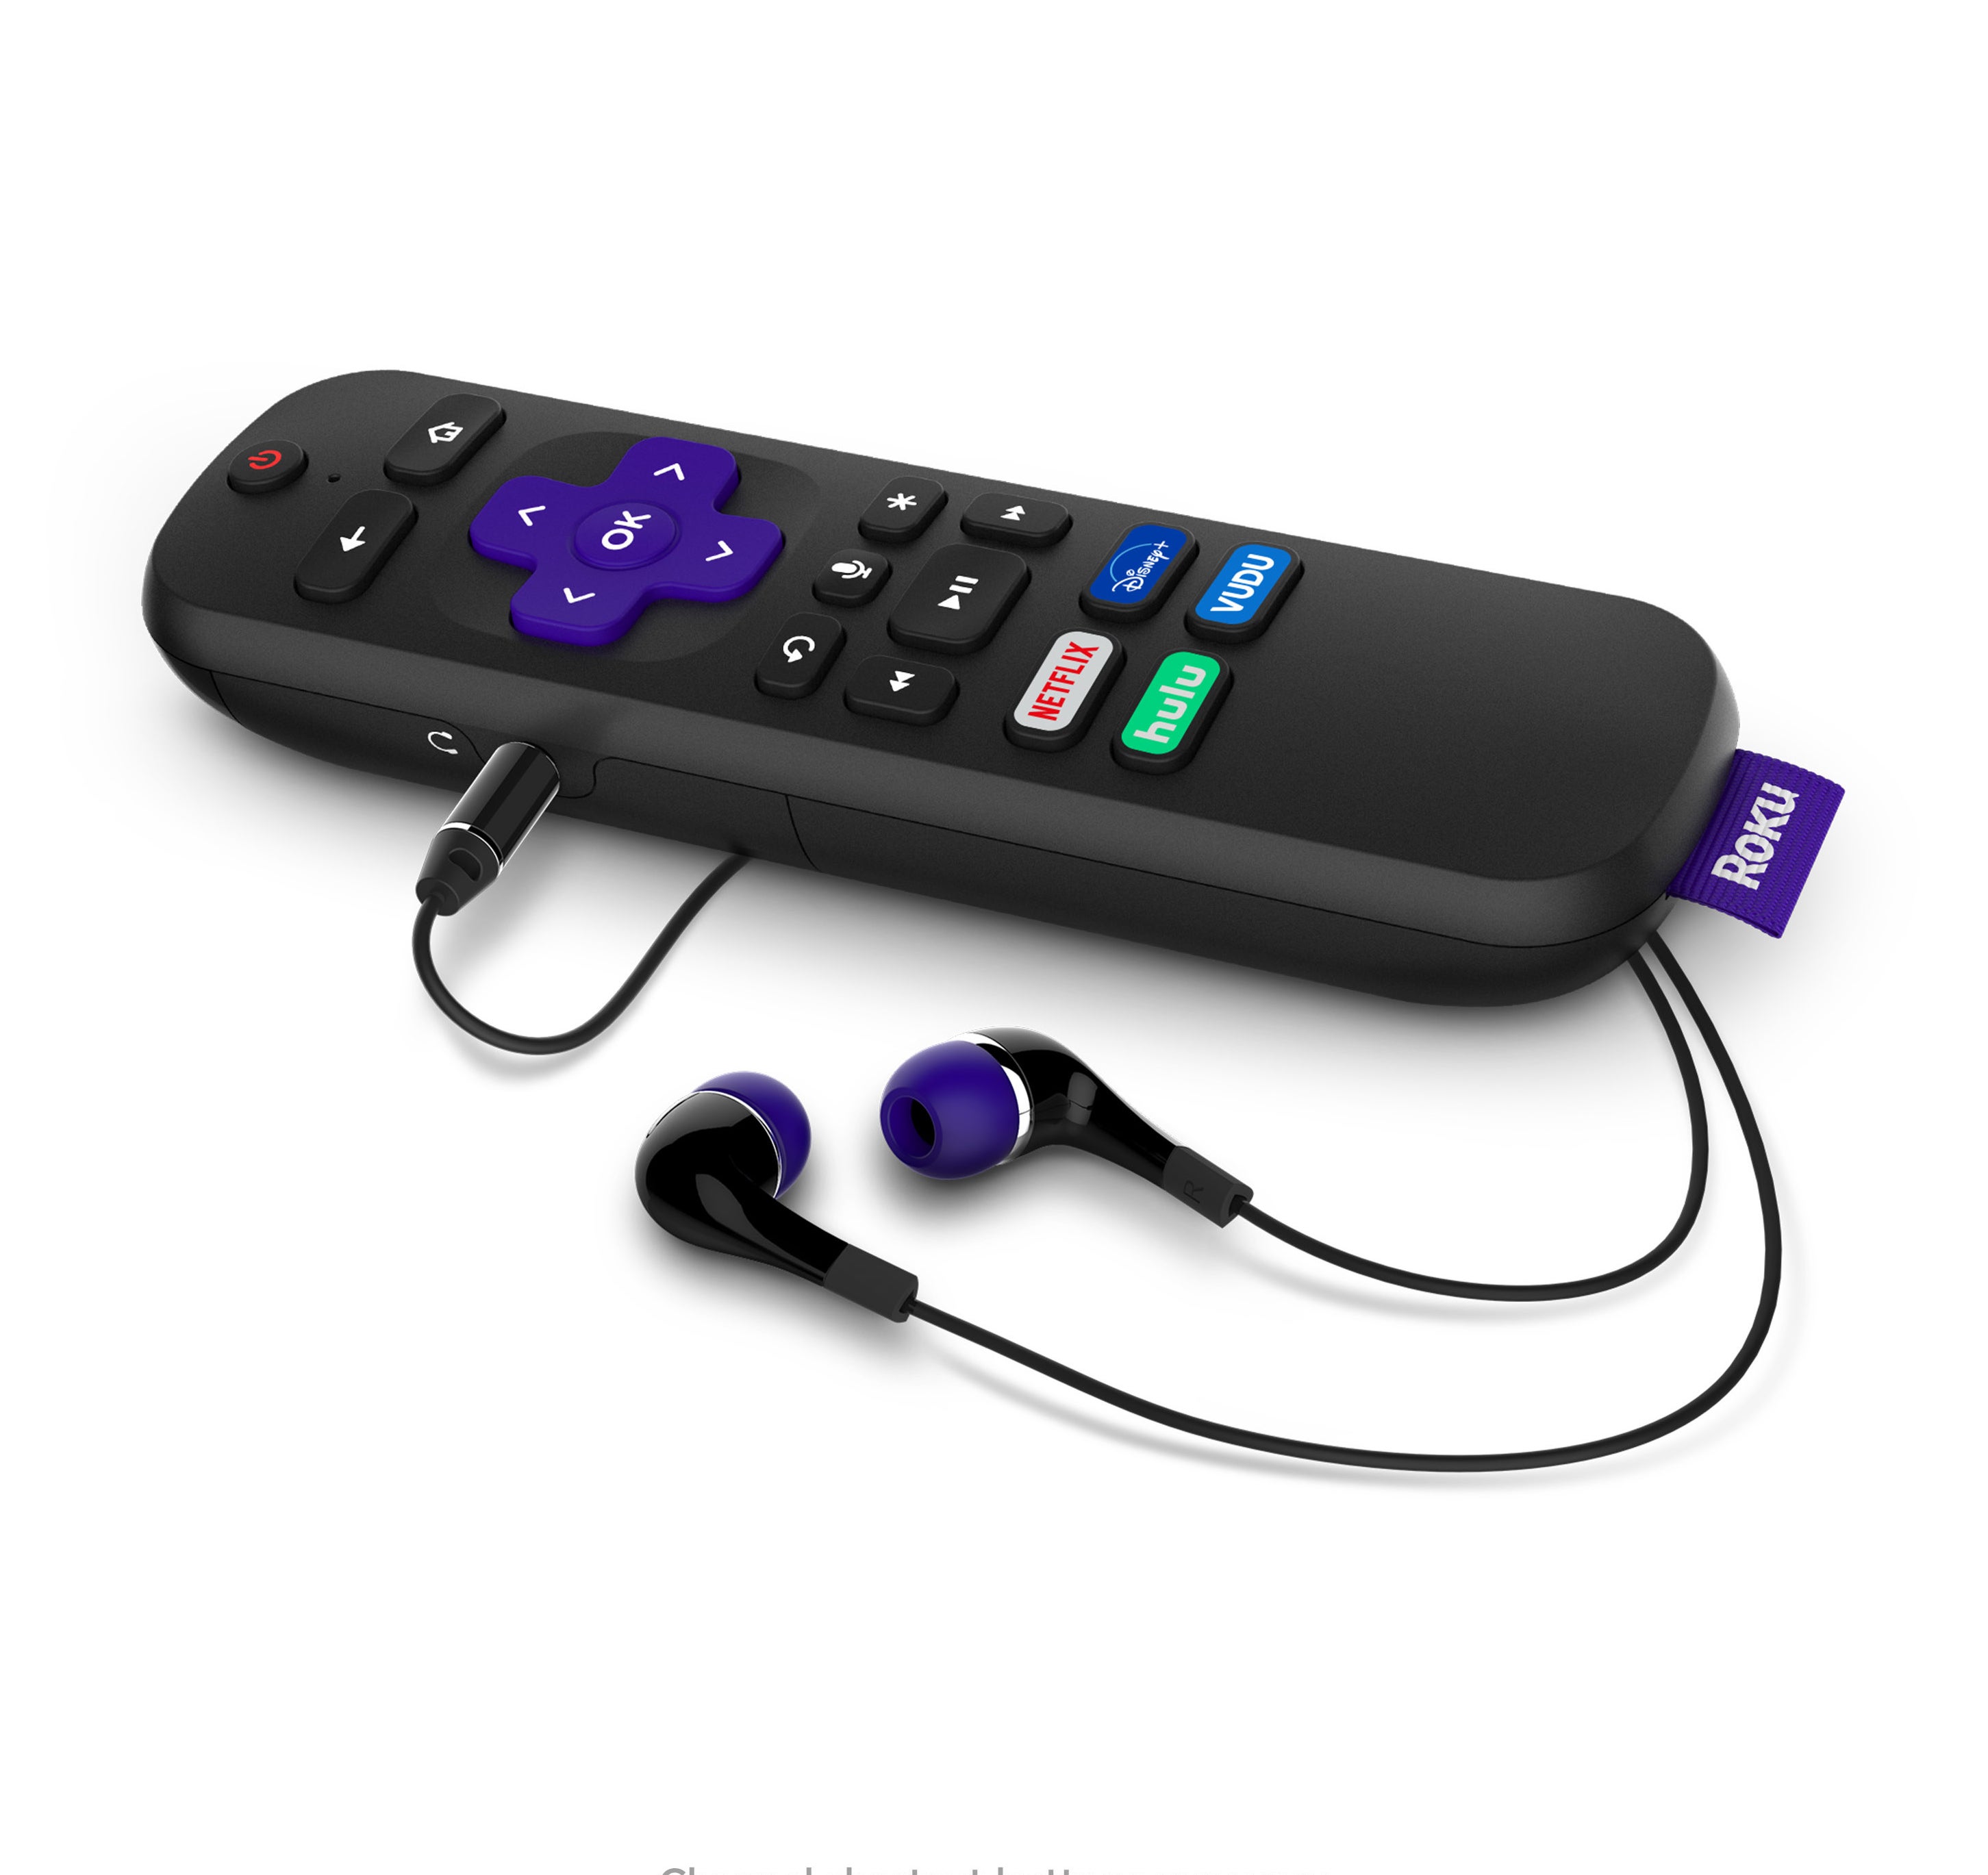 The remote, which has a headphone jack and a button to press to give voice commands